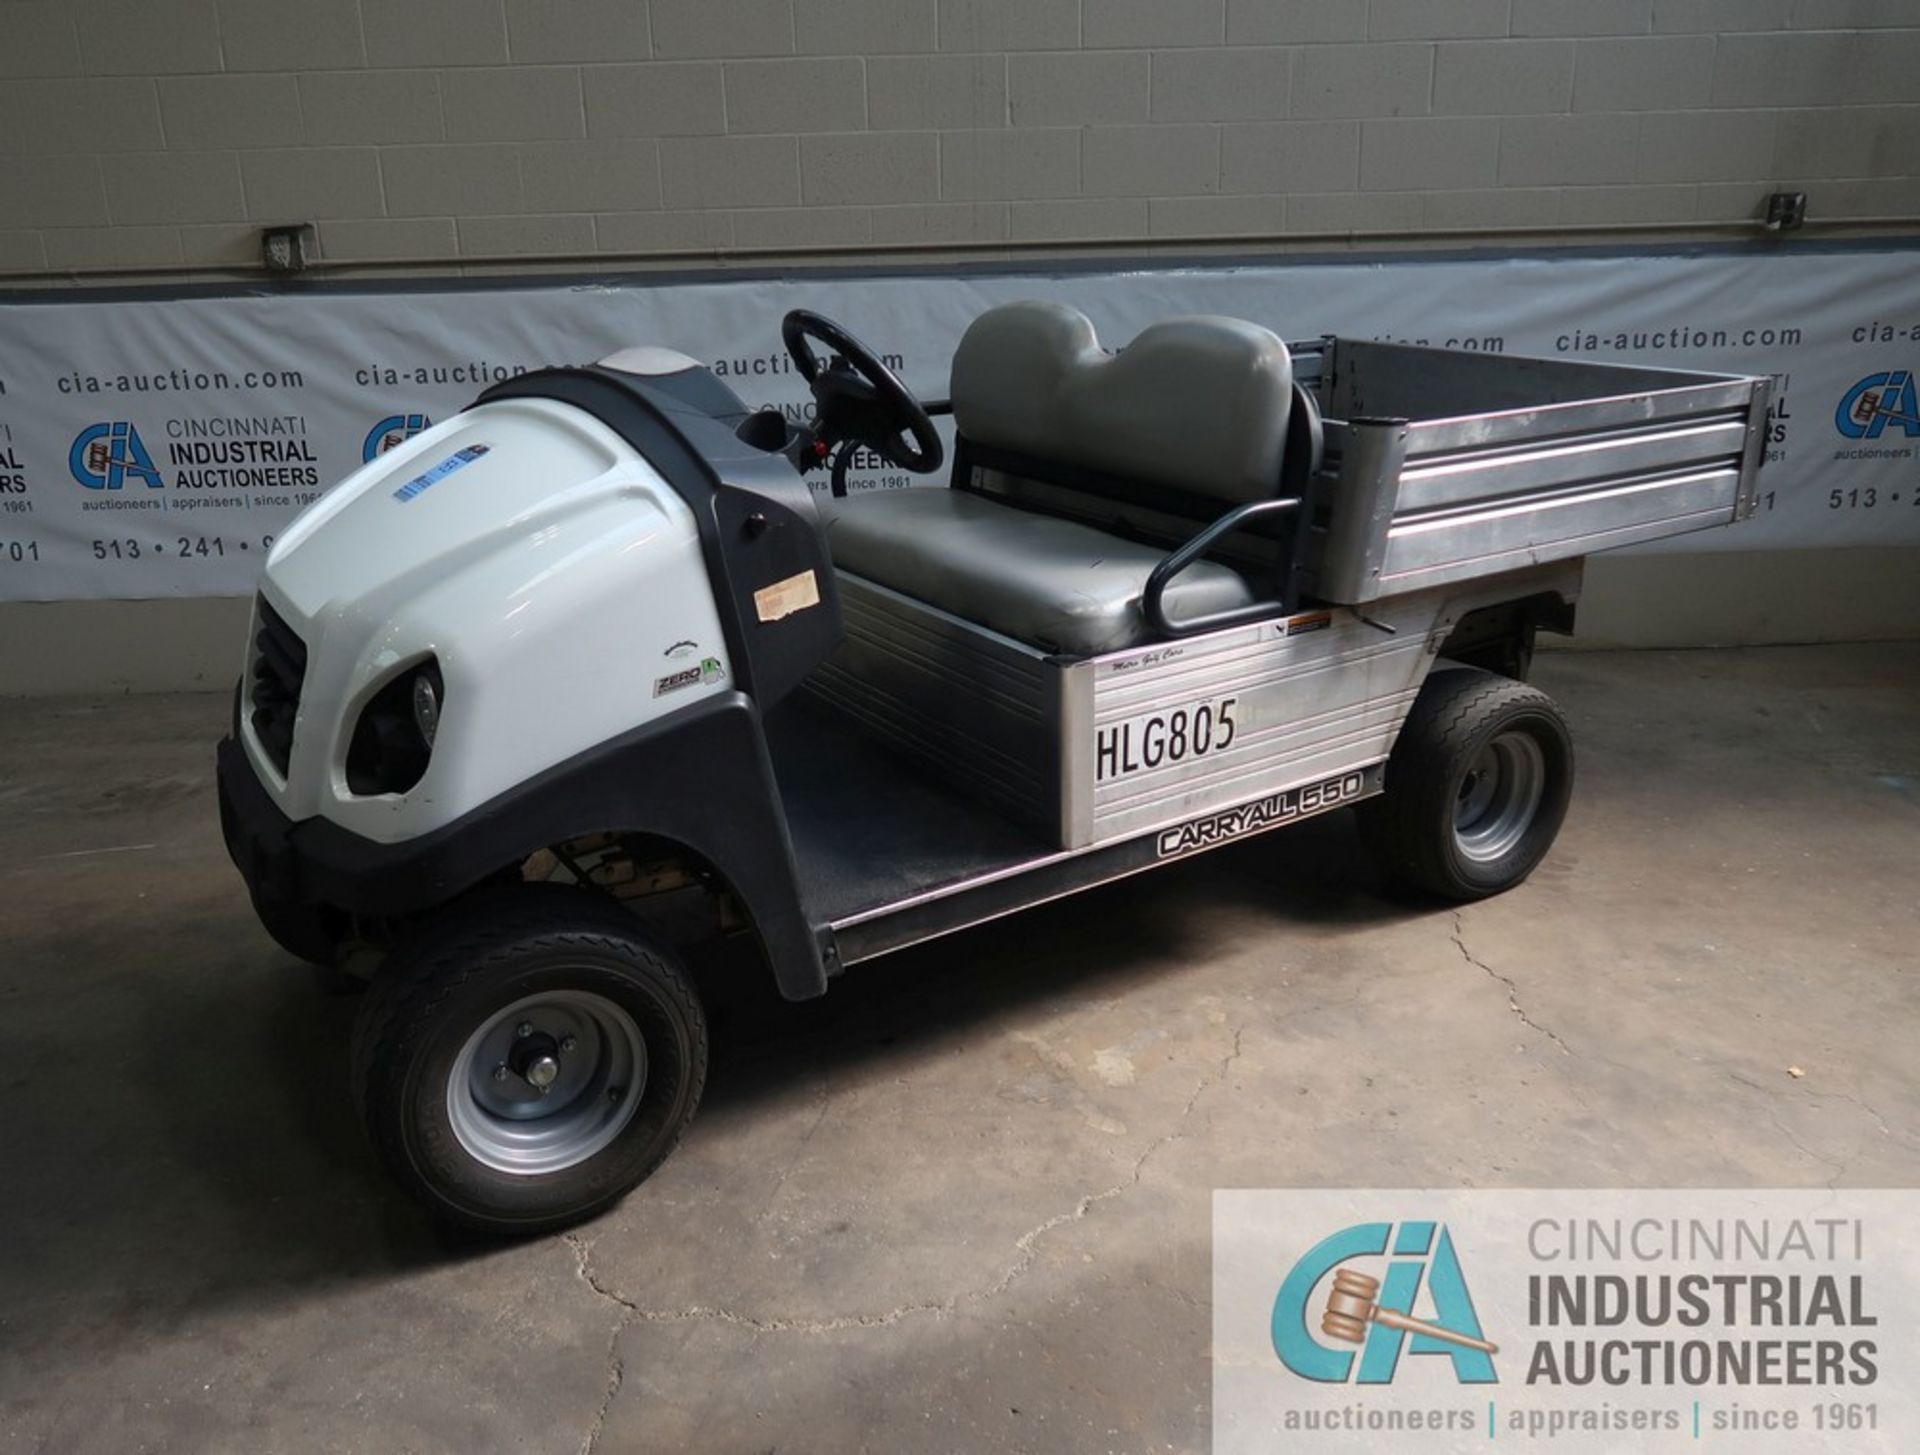 2015 CLUB CAR MODEL CARRYALL 550 ELECTRIC GOLF CART- Needs new batteries - does not run; S/N MM1535